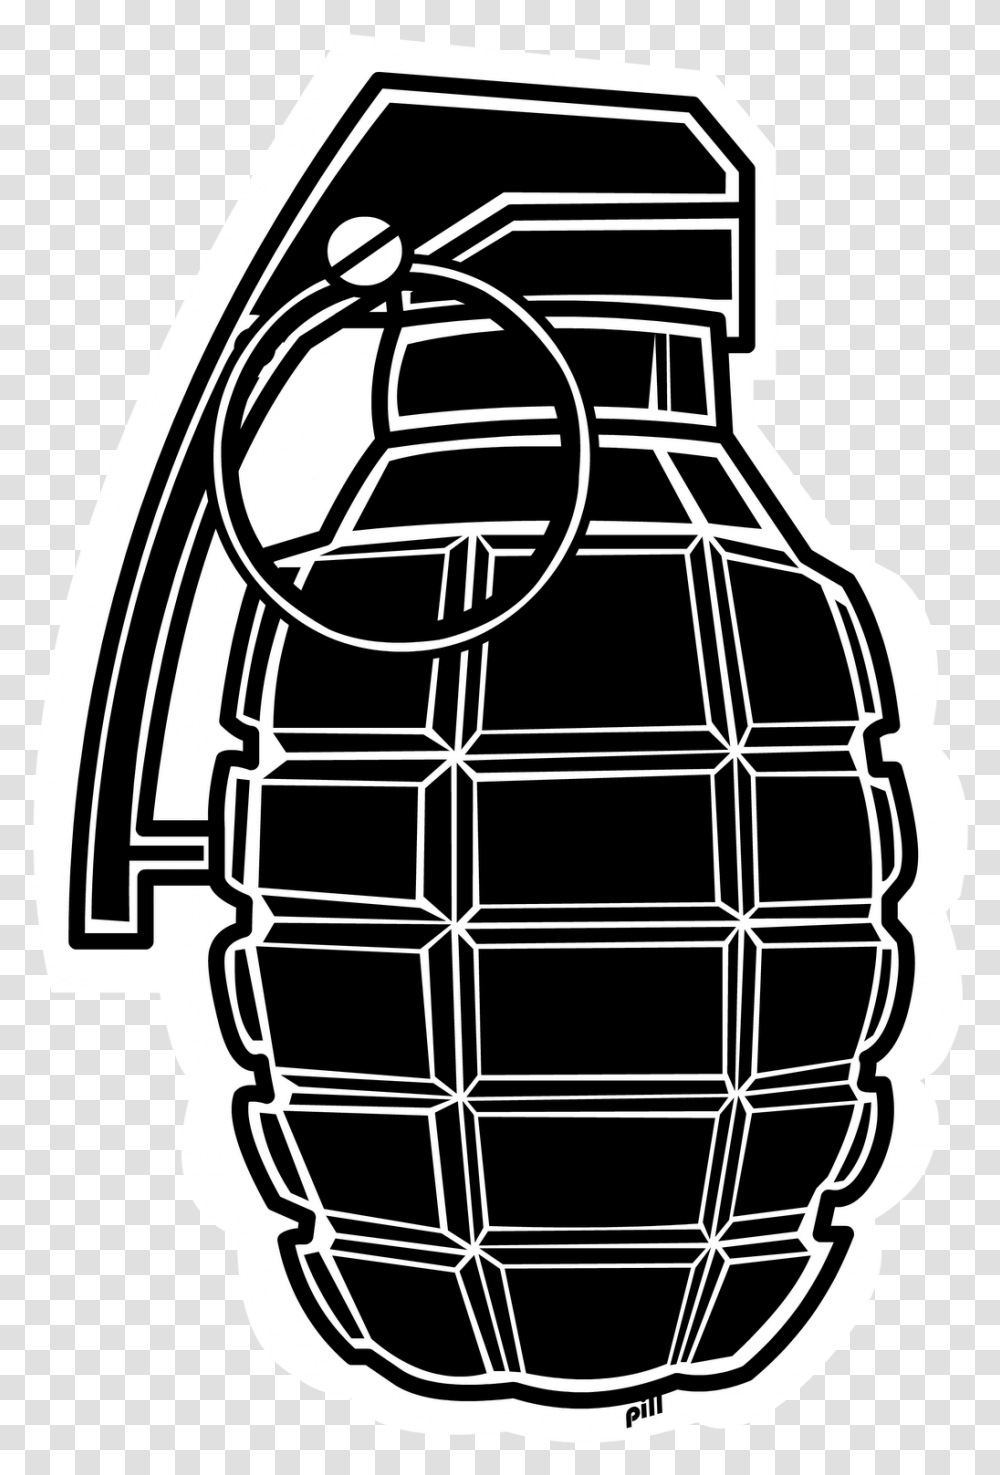 Pineapple Grenade Grenade, Bomb, Weapon, Weaponry Transparent Png